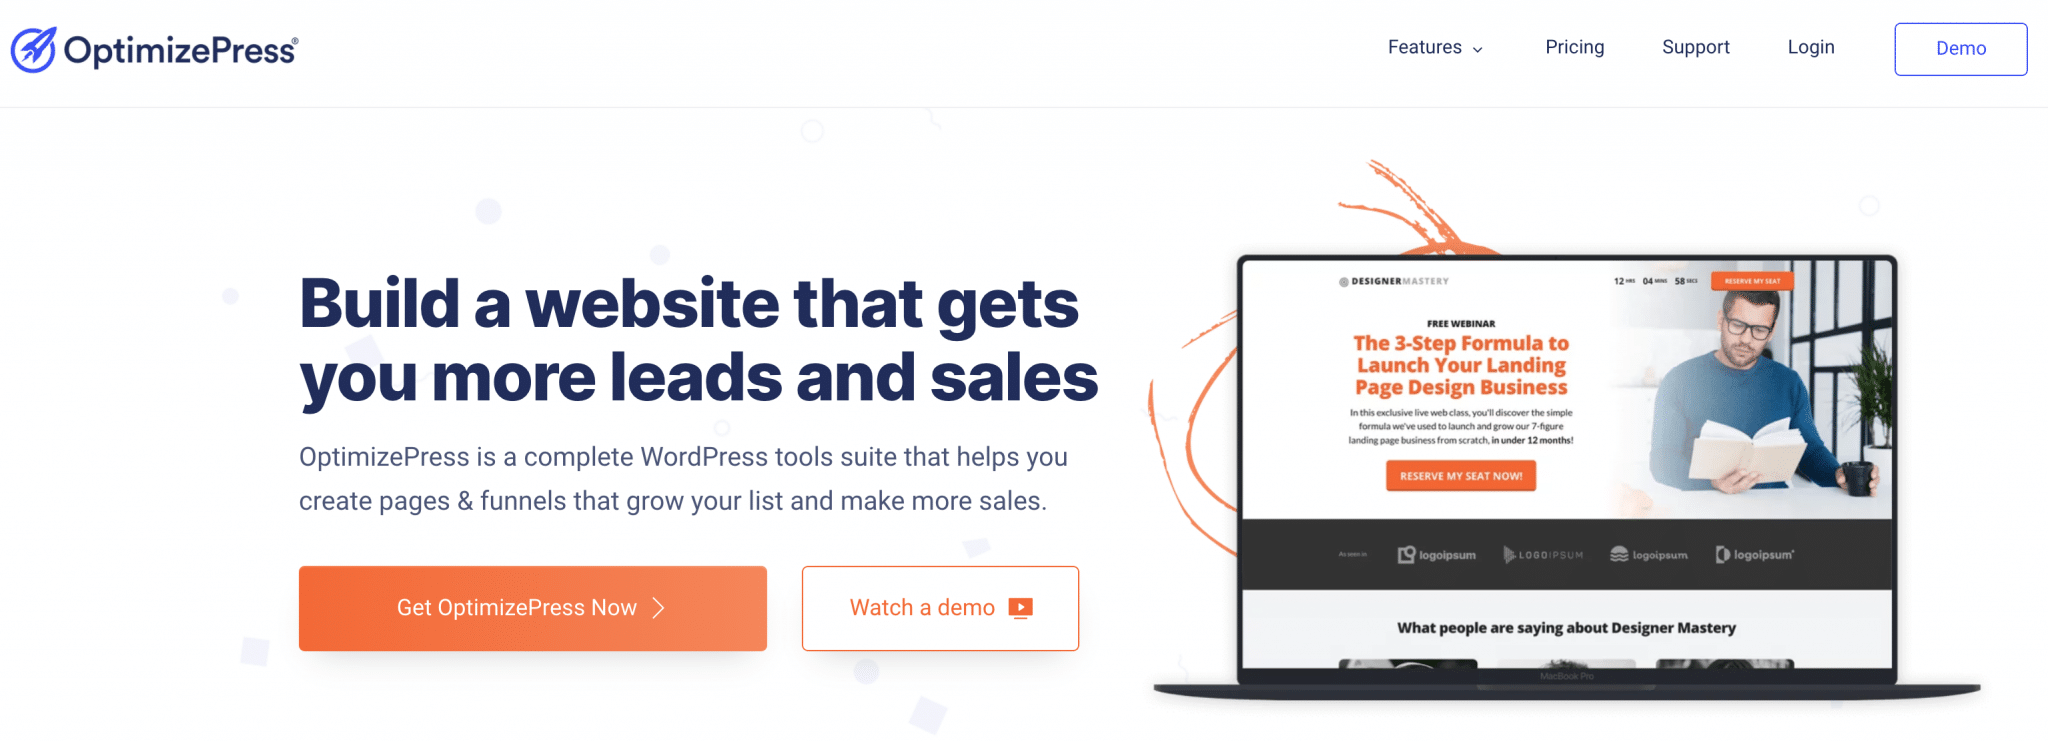 OptimizePress plugin to build a website that gets you more leads and sales.